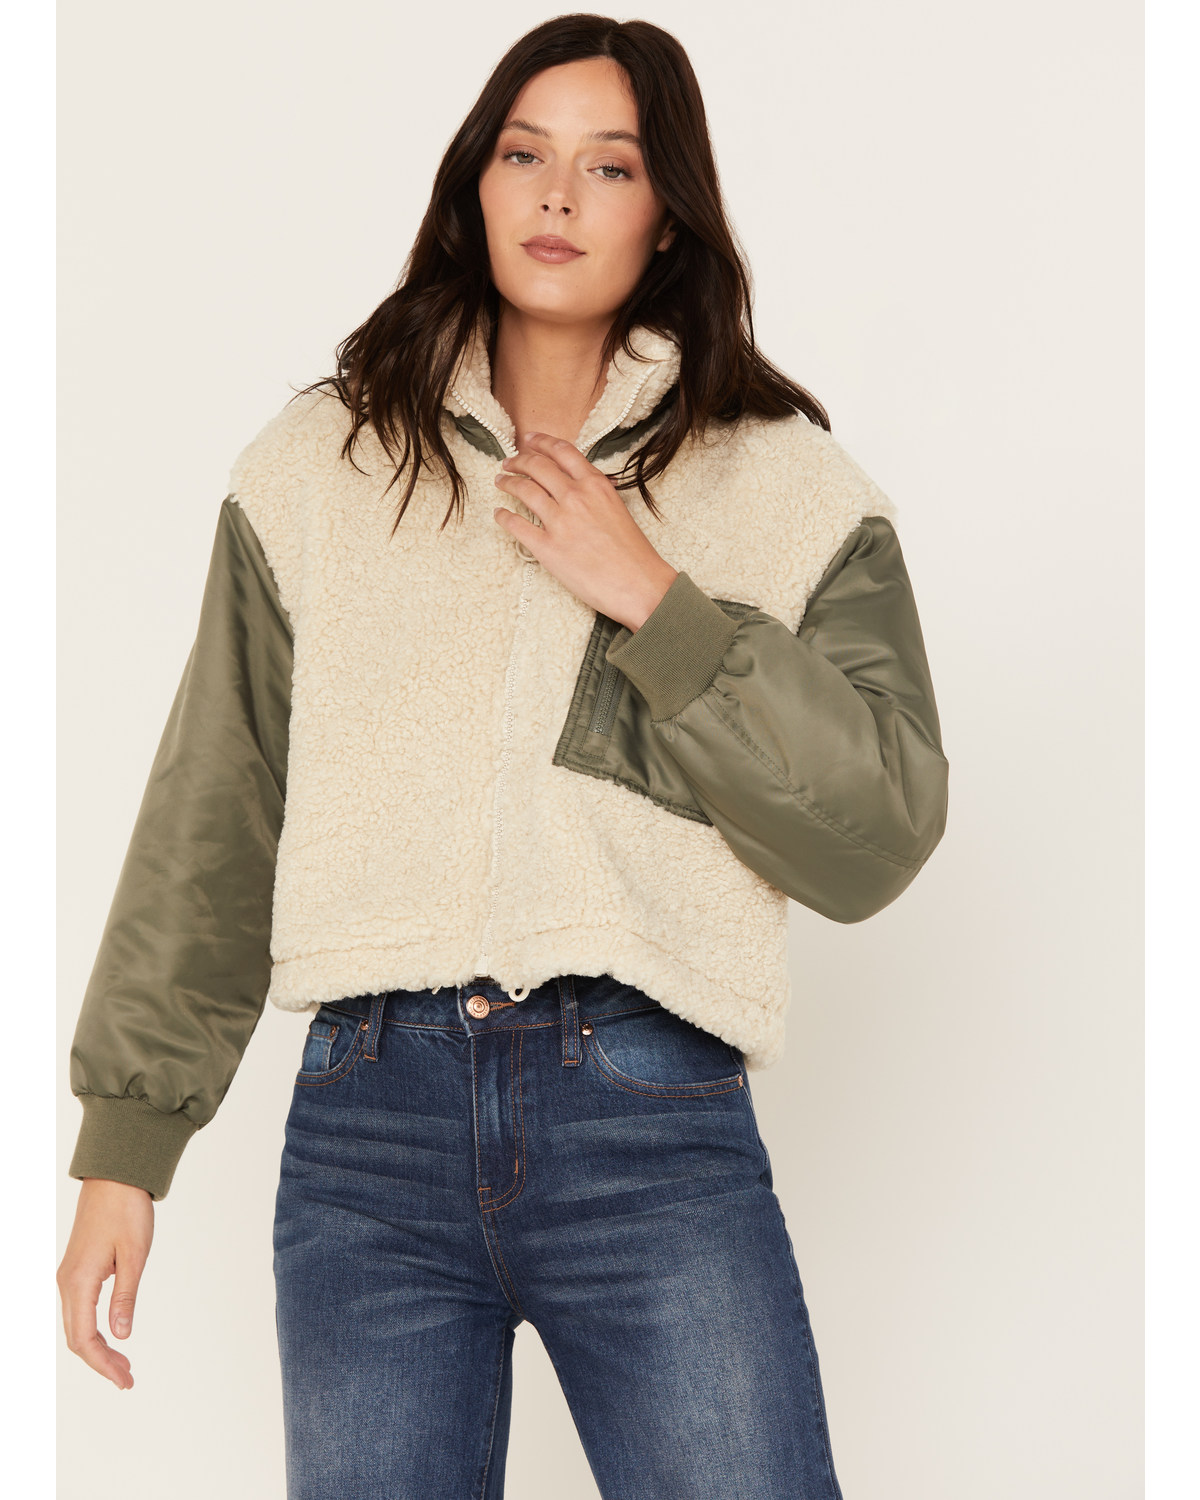 Cleo + Wolf Women's Zip-Up Cropped Jacket